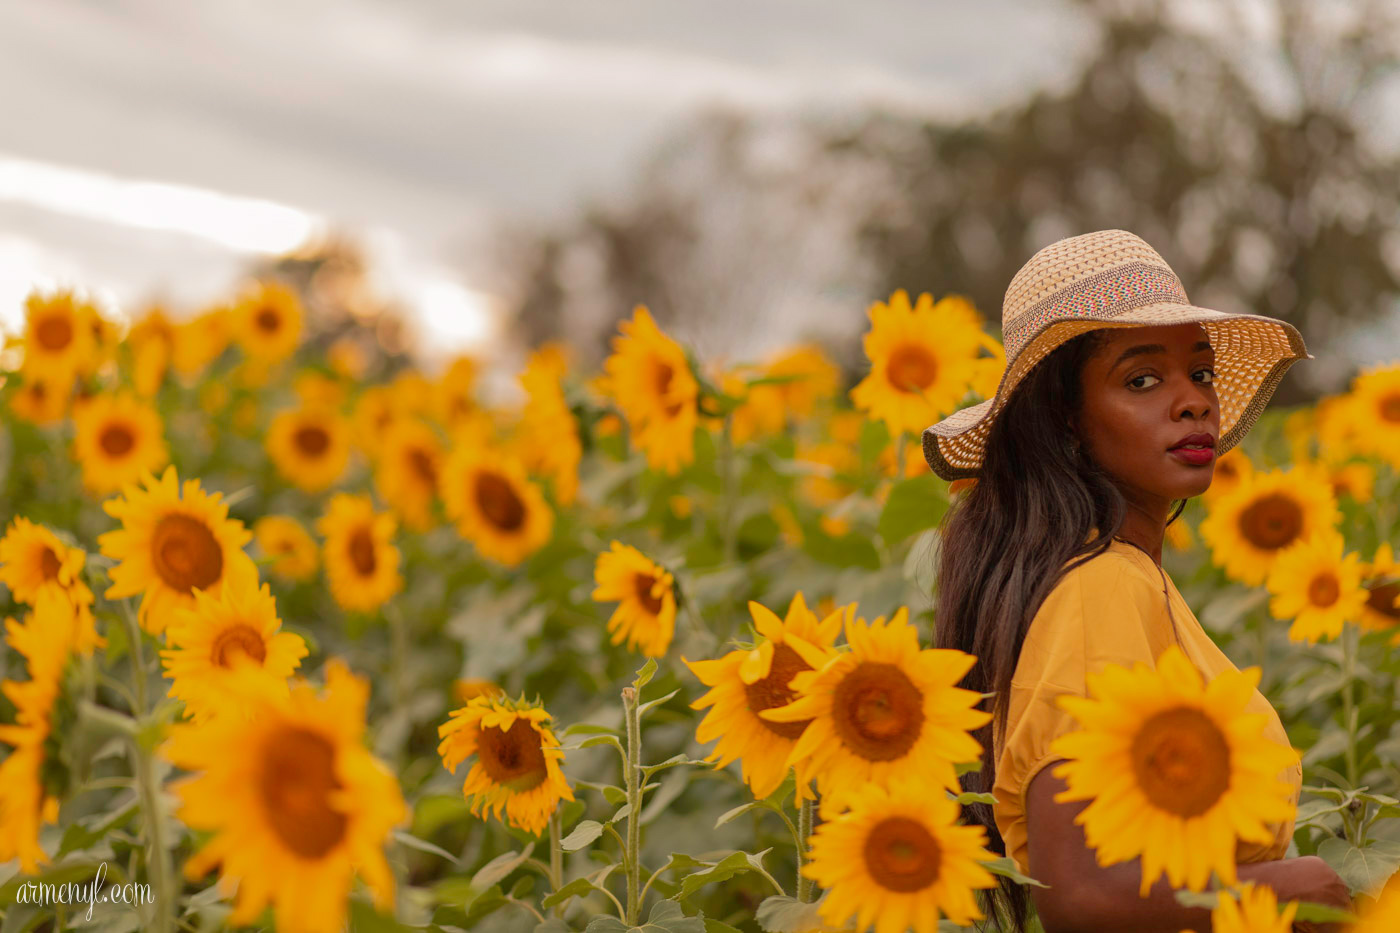 A fashion through travel Self Portrait series by Armenyl featuring the sunflower fields in Jarrettsville Maryland